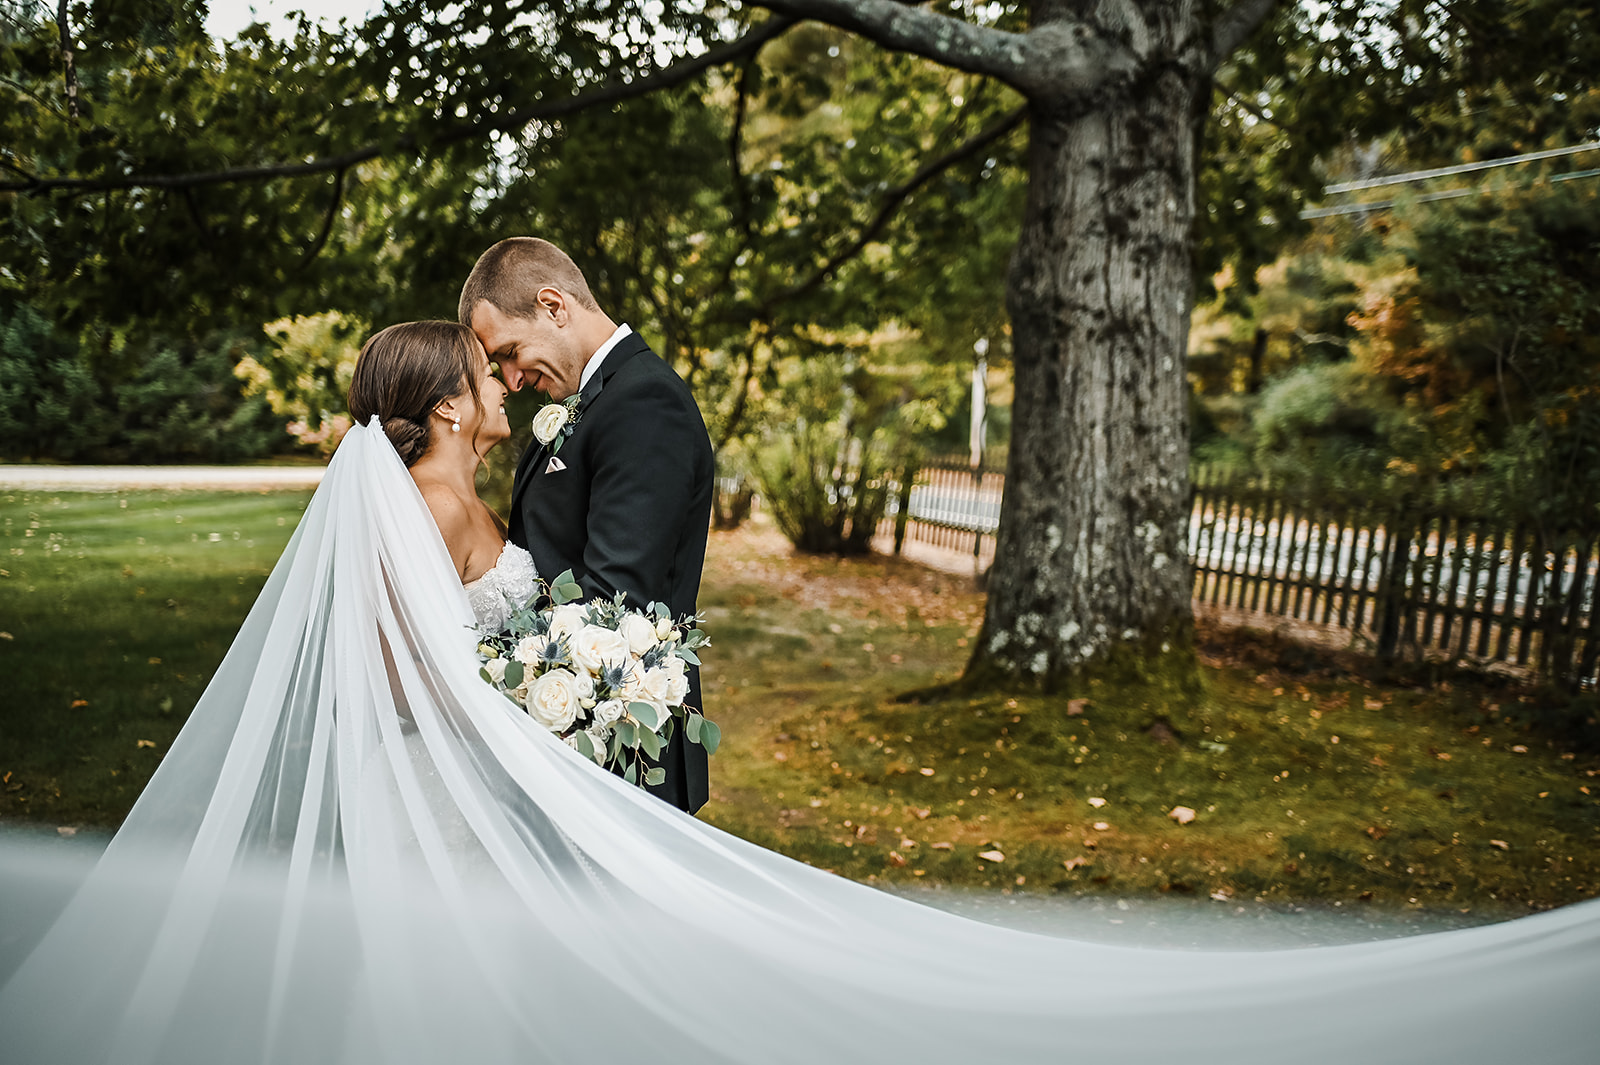 Courtney and Jacob were married at the beautiful Barn on Walnut Hill in Yarmouth, Maine. Their October wedding was so st